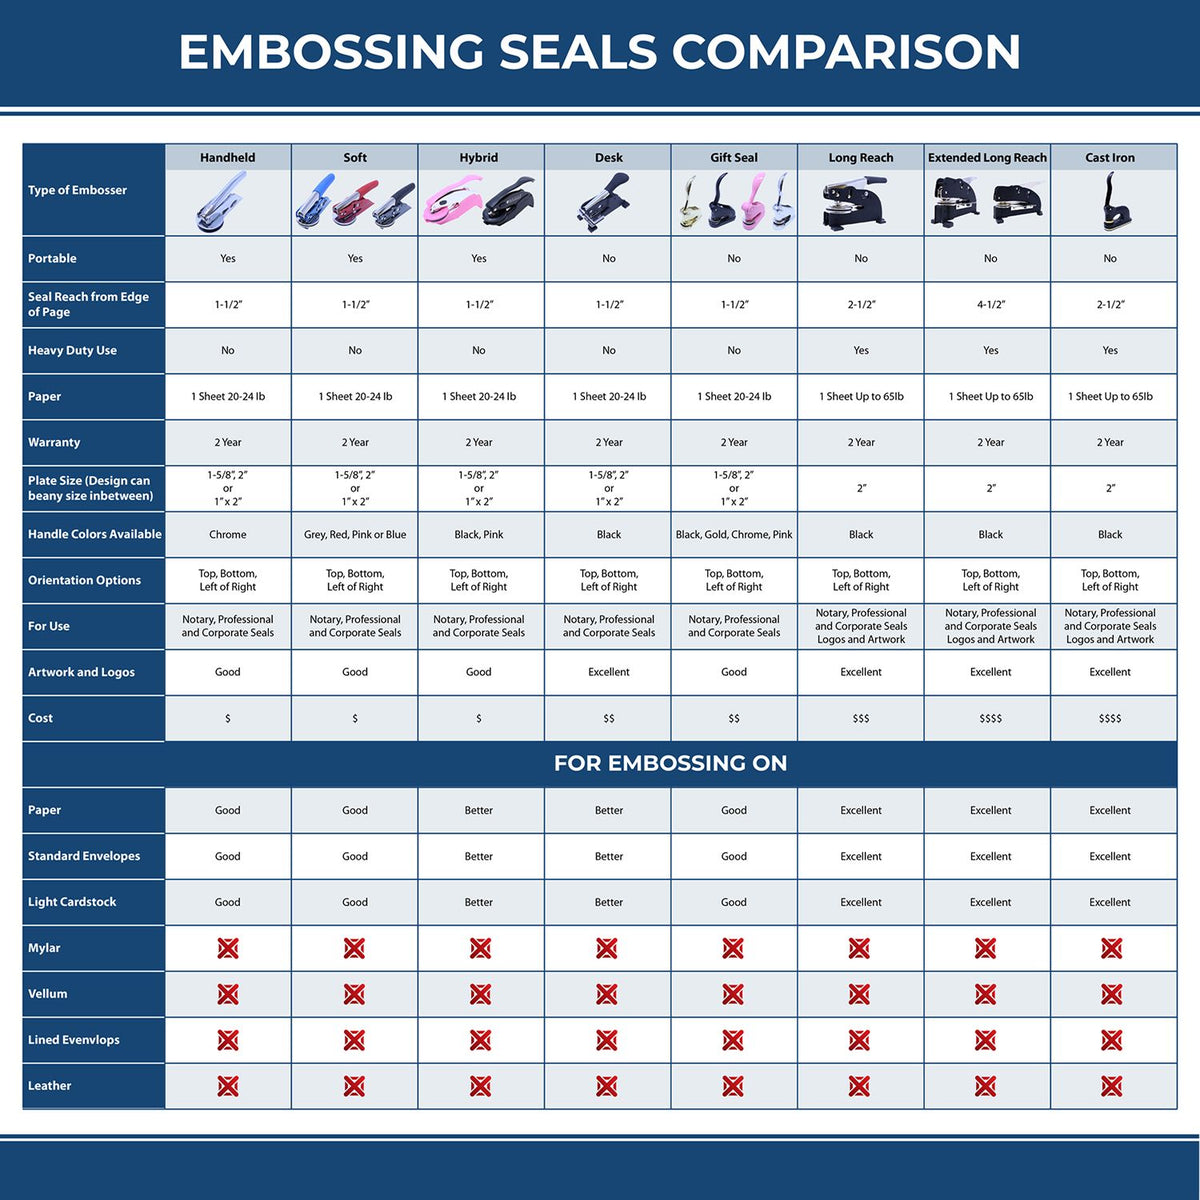 A comparison chart for the different types of mount models available for the South Carolina Engineer Desk Seal.